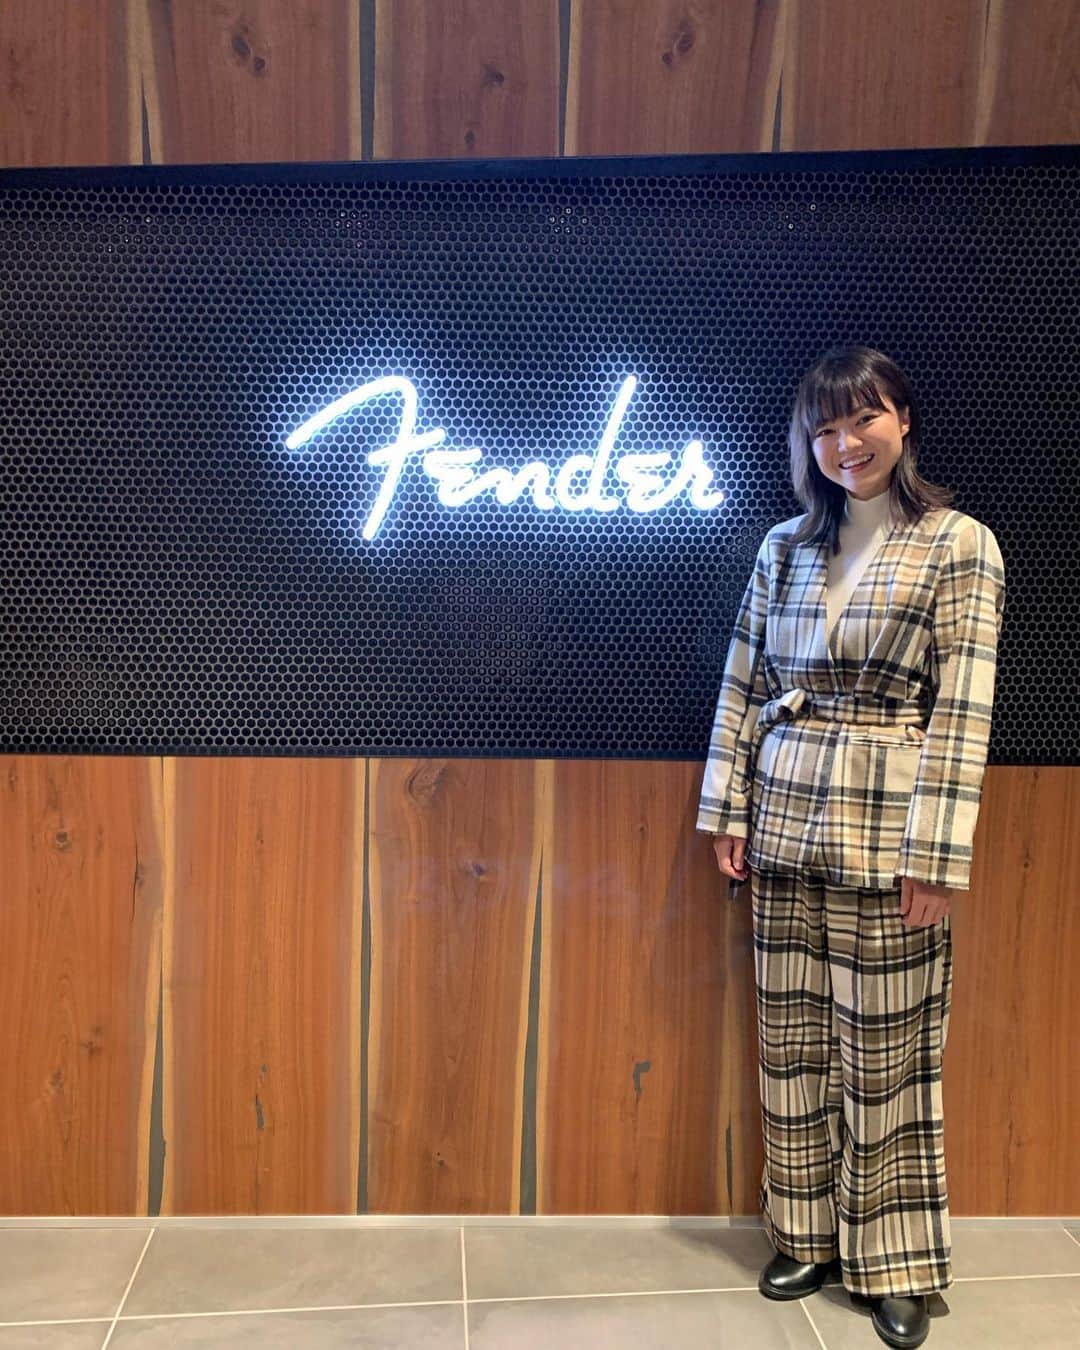 弓木英梨乃のインスタグラム：「✨ I am delighted to announce that I have signed an endorsement agreement with Fender! I am truly honored to be one of the Fender Artists I have always admired. The Fender my father lent me when I first started playing guitar, the Fender I played when I debuted as a singer-songwriter, the Fender I played in KIRINJI where I spent most of my 20s, the Fender I sounded in stadiums and arenas as a support guitarist, the Fender I shared my time studying abroad with... Fender guitars have filled my life as a guitarist with colour for all these years. Fender guitars not only bring out the best in me, but also make me realize new possibilities beyond that. Especially in recent years, I believe that finding the American Ultra Stratocaster® in 2020 has opened a new door for me. Fender guitars have always made me feel fresh and enthusiastic, like when I first started playing guitar. I am still in the process of developing myself, but I want to continue to grow and enjoy playing guitar with my Fenders, which always give me the courage to take on new challenges!  この度、わたし弓木英梨乃はフェンダーとエンドースメント契約を結びました！憧れのフェンダーアーティストの一員になれることを心から光栄に思います。ギターを始めたばかりの頃弾いていた父のフェンダー、シンガーソングライターとしてデビューした頃に弾いていたフェンダー、20代のほとんどを過ごしたKIRINJIで弾いていたフェンダー、サポートギタリストとしてスタジアムやアリーナで鳴らしたフェンダー、海外での留学生活を共にしたフェンダー… フェンダーのギターは今日までのわたしのギタリストとしての人生を彩ってきてくれました。フェンダーのギターは自分が今持っている力を最大限に引き出してくれるだけにとどまらず、それを超えた新たな可能性に気づかせてくれます。特に近年では、2020年にAmerican Ultra Stratocaster®に出会えたことが自分の新しい扉を開いてくれたと感じています。フェンダーのギターは、いつもわたしをギターを始めたばかりの頃のような新鮮で無我夢中な気持ちにさせてくれます。まだまだ発展途中のわたしですが、チャレンジする勇気をいつも与えてくれるフェンダーのギターと共に成長し続け、楽しくギターを弾き続けていきたいです。」